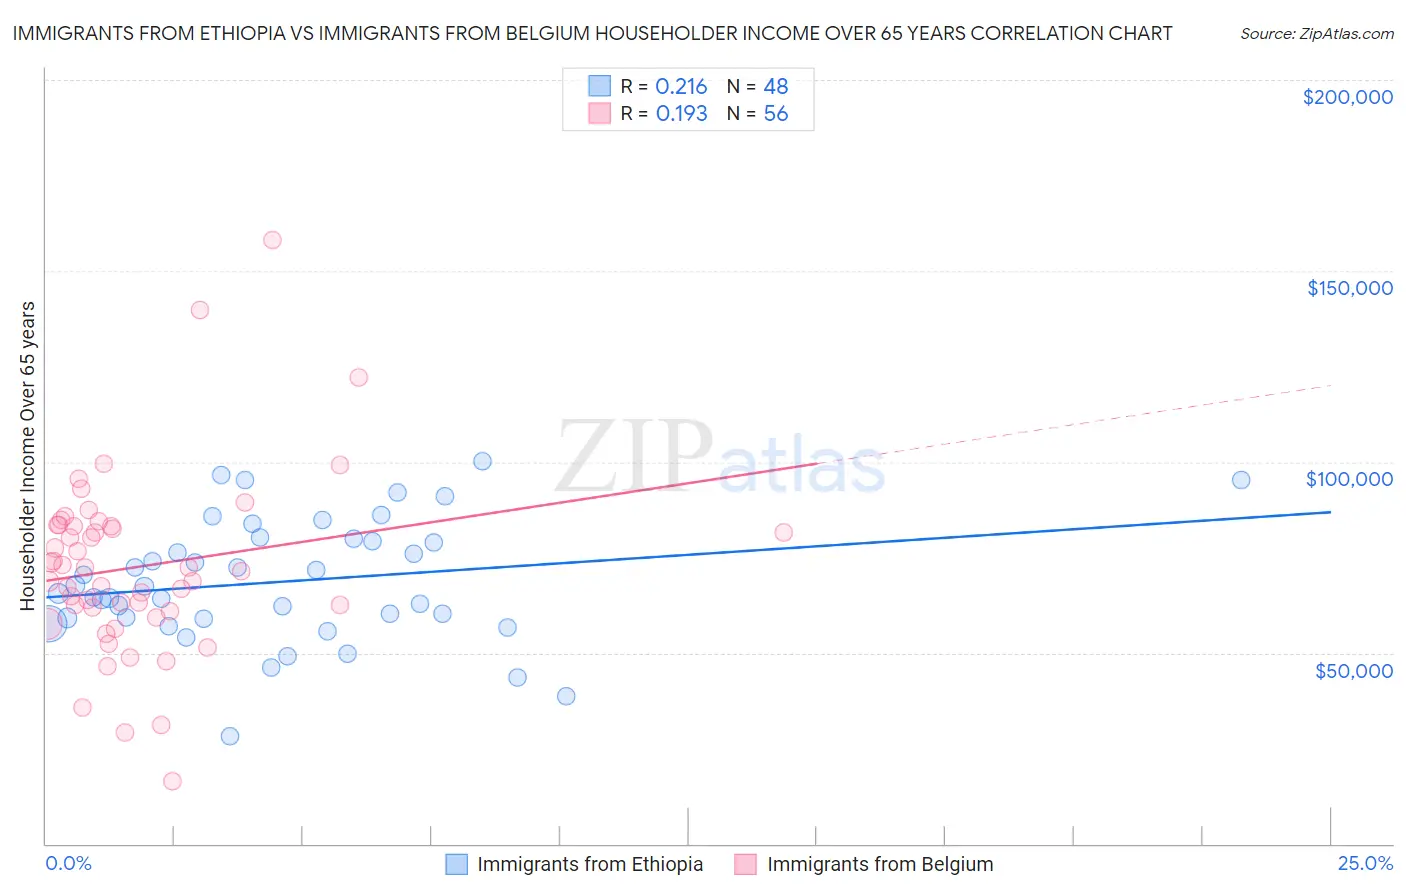 Immigrants from Ethiopia vs Immigrants from Belgium Householder Income Over 65 years